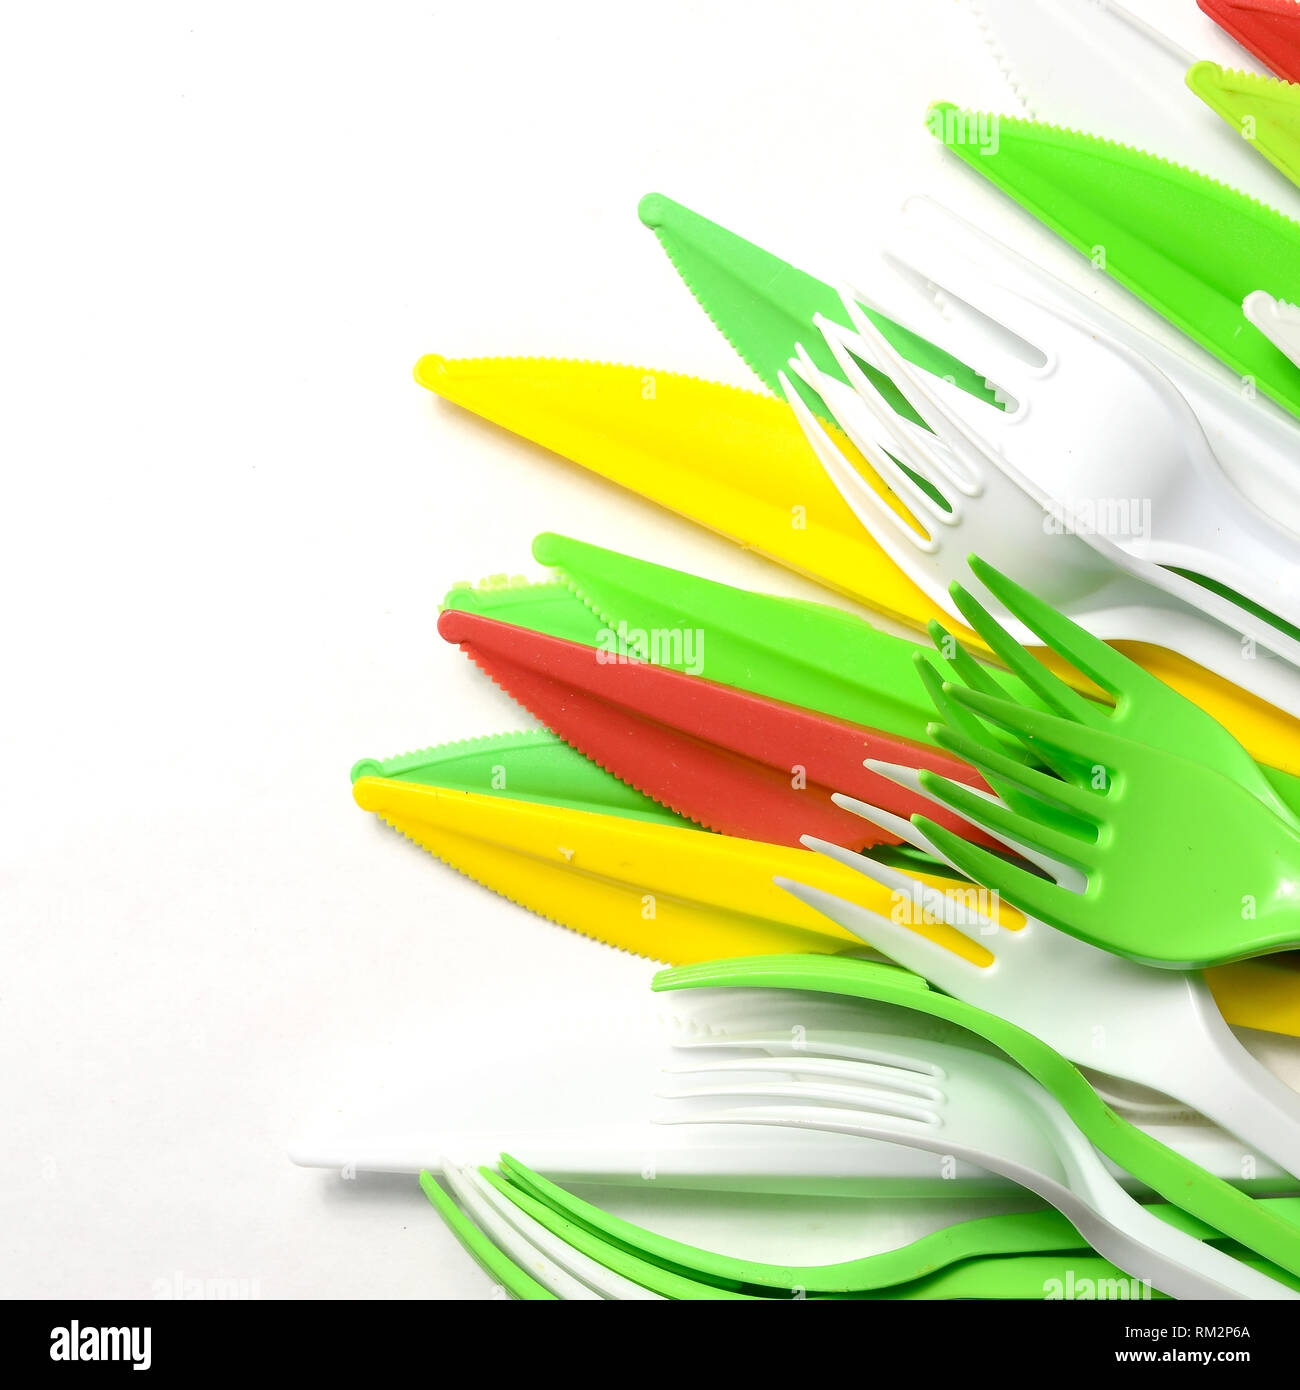 Pile of bright yellow, green and white plastic kitchenware single use appliances on white background Stock Photo